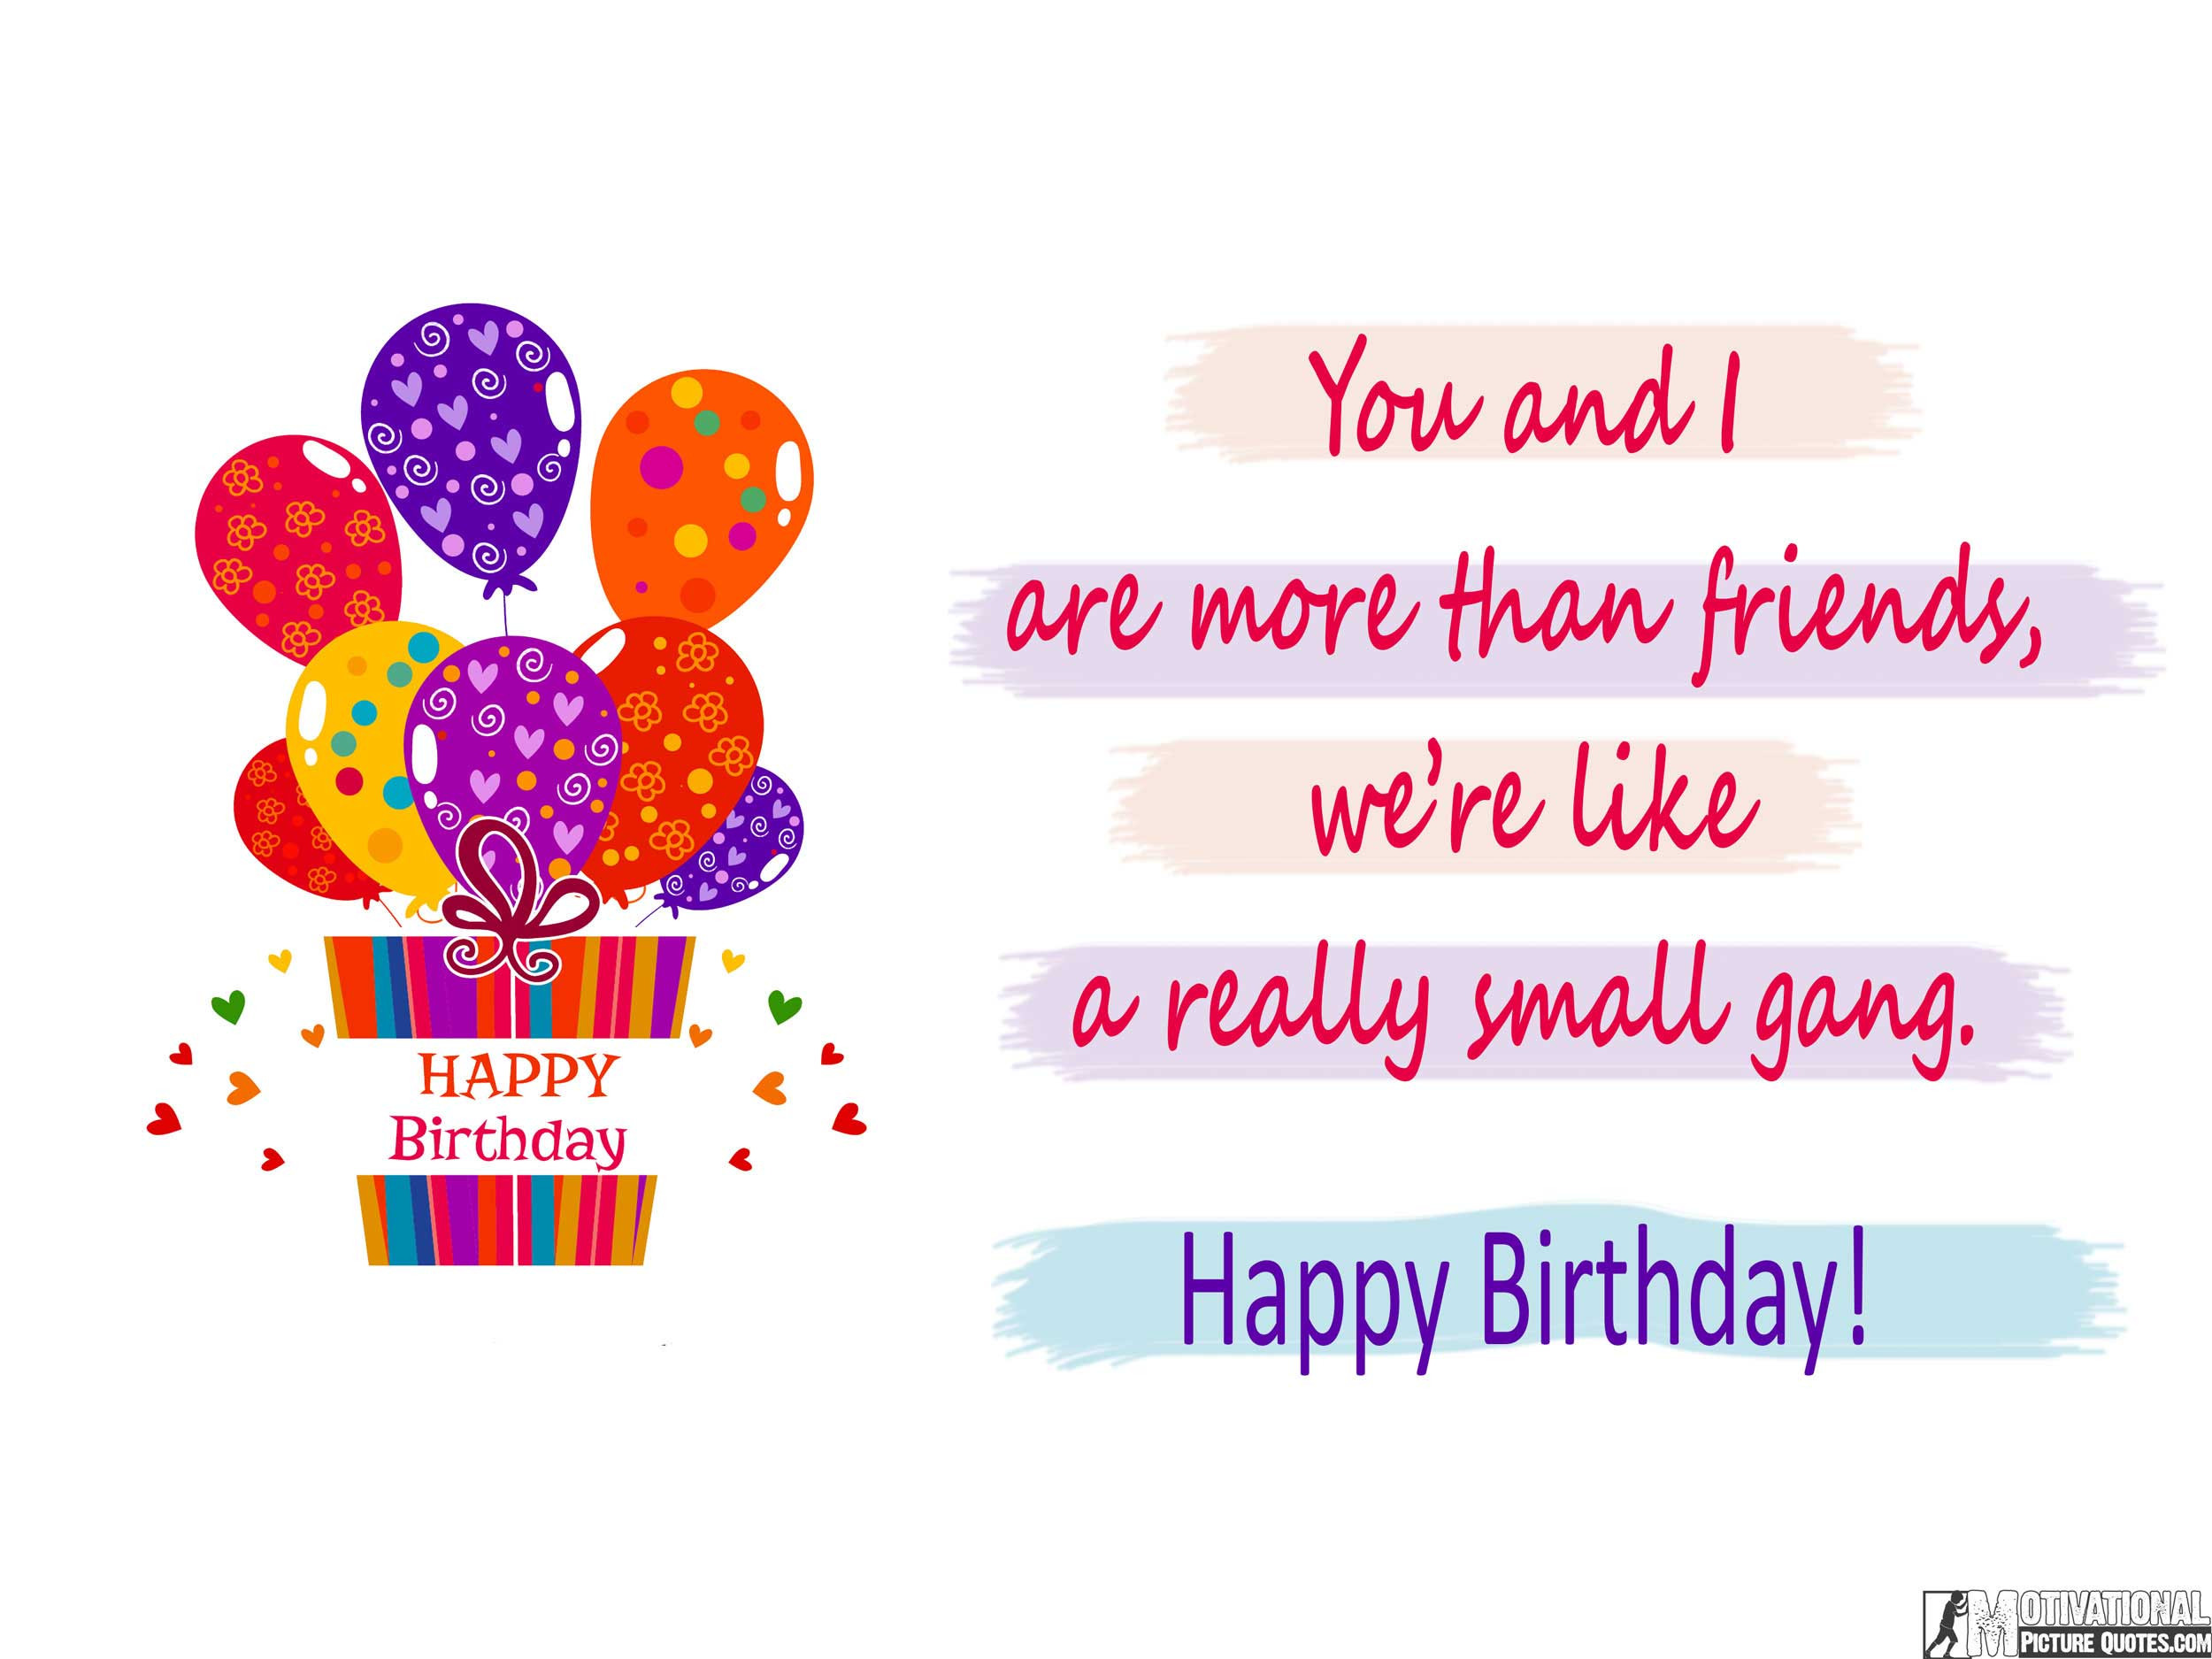 Birthday Quotes For A Friend
 35 Inspirational Birthday Quotes